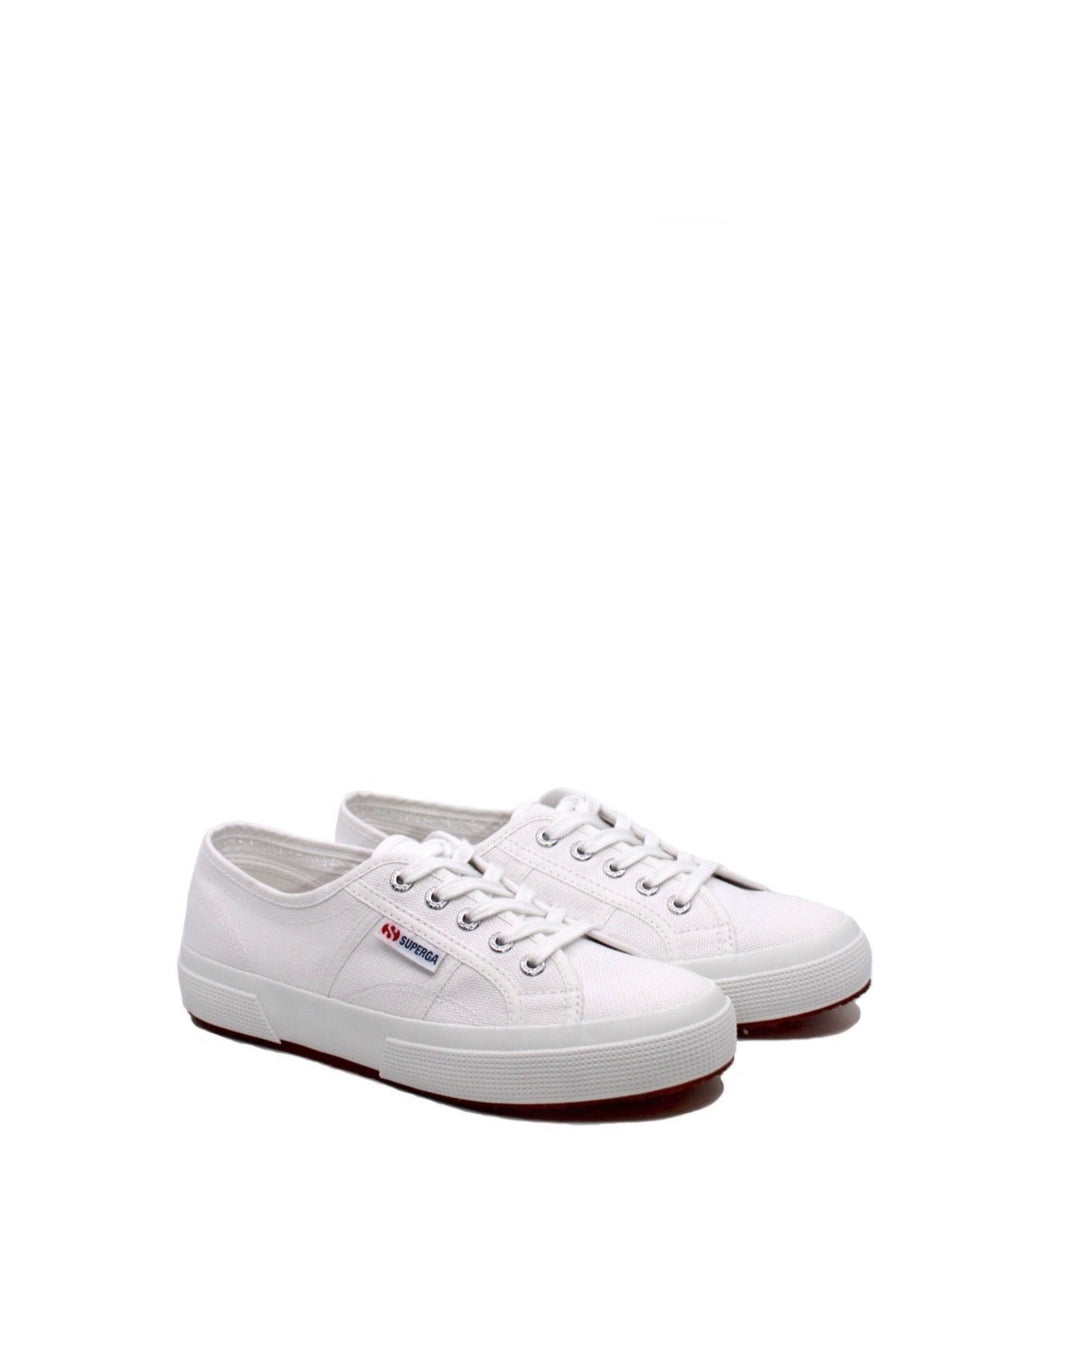 Superga Platforms - Black, White, Rose Gold, and More | Dear Lucy